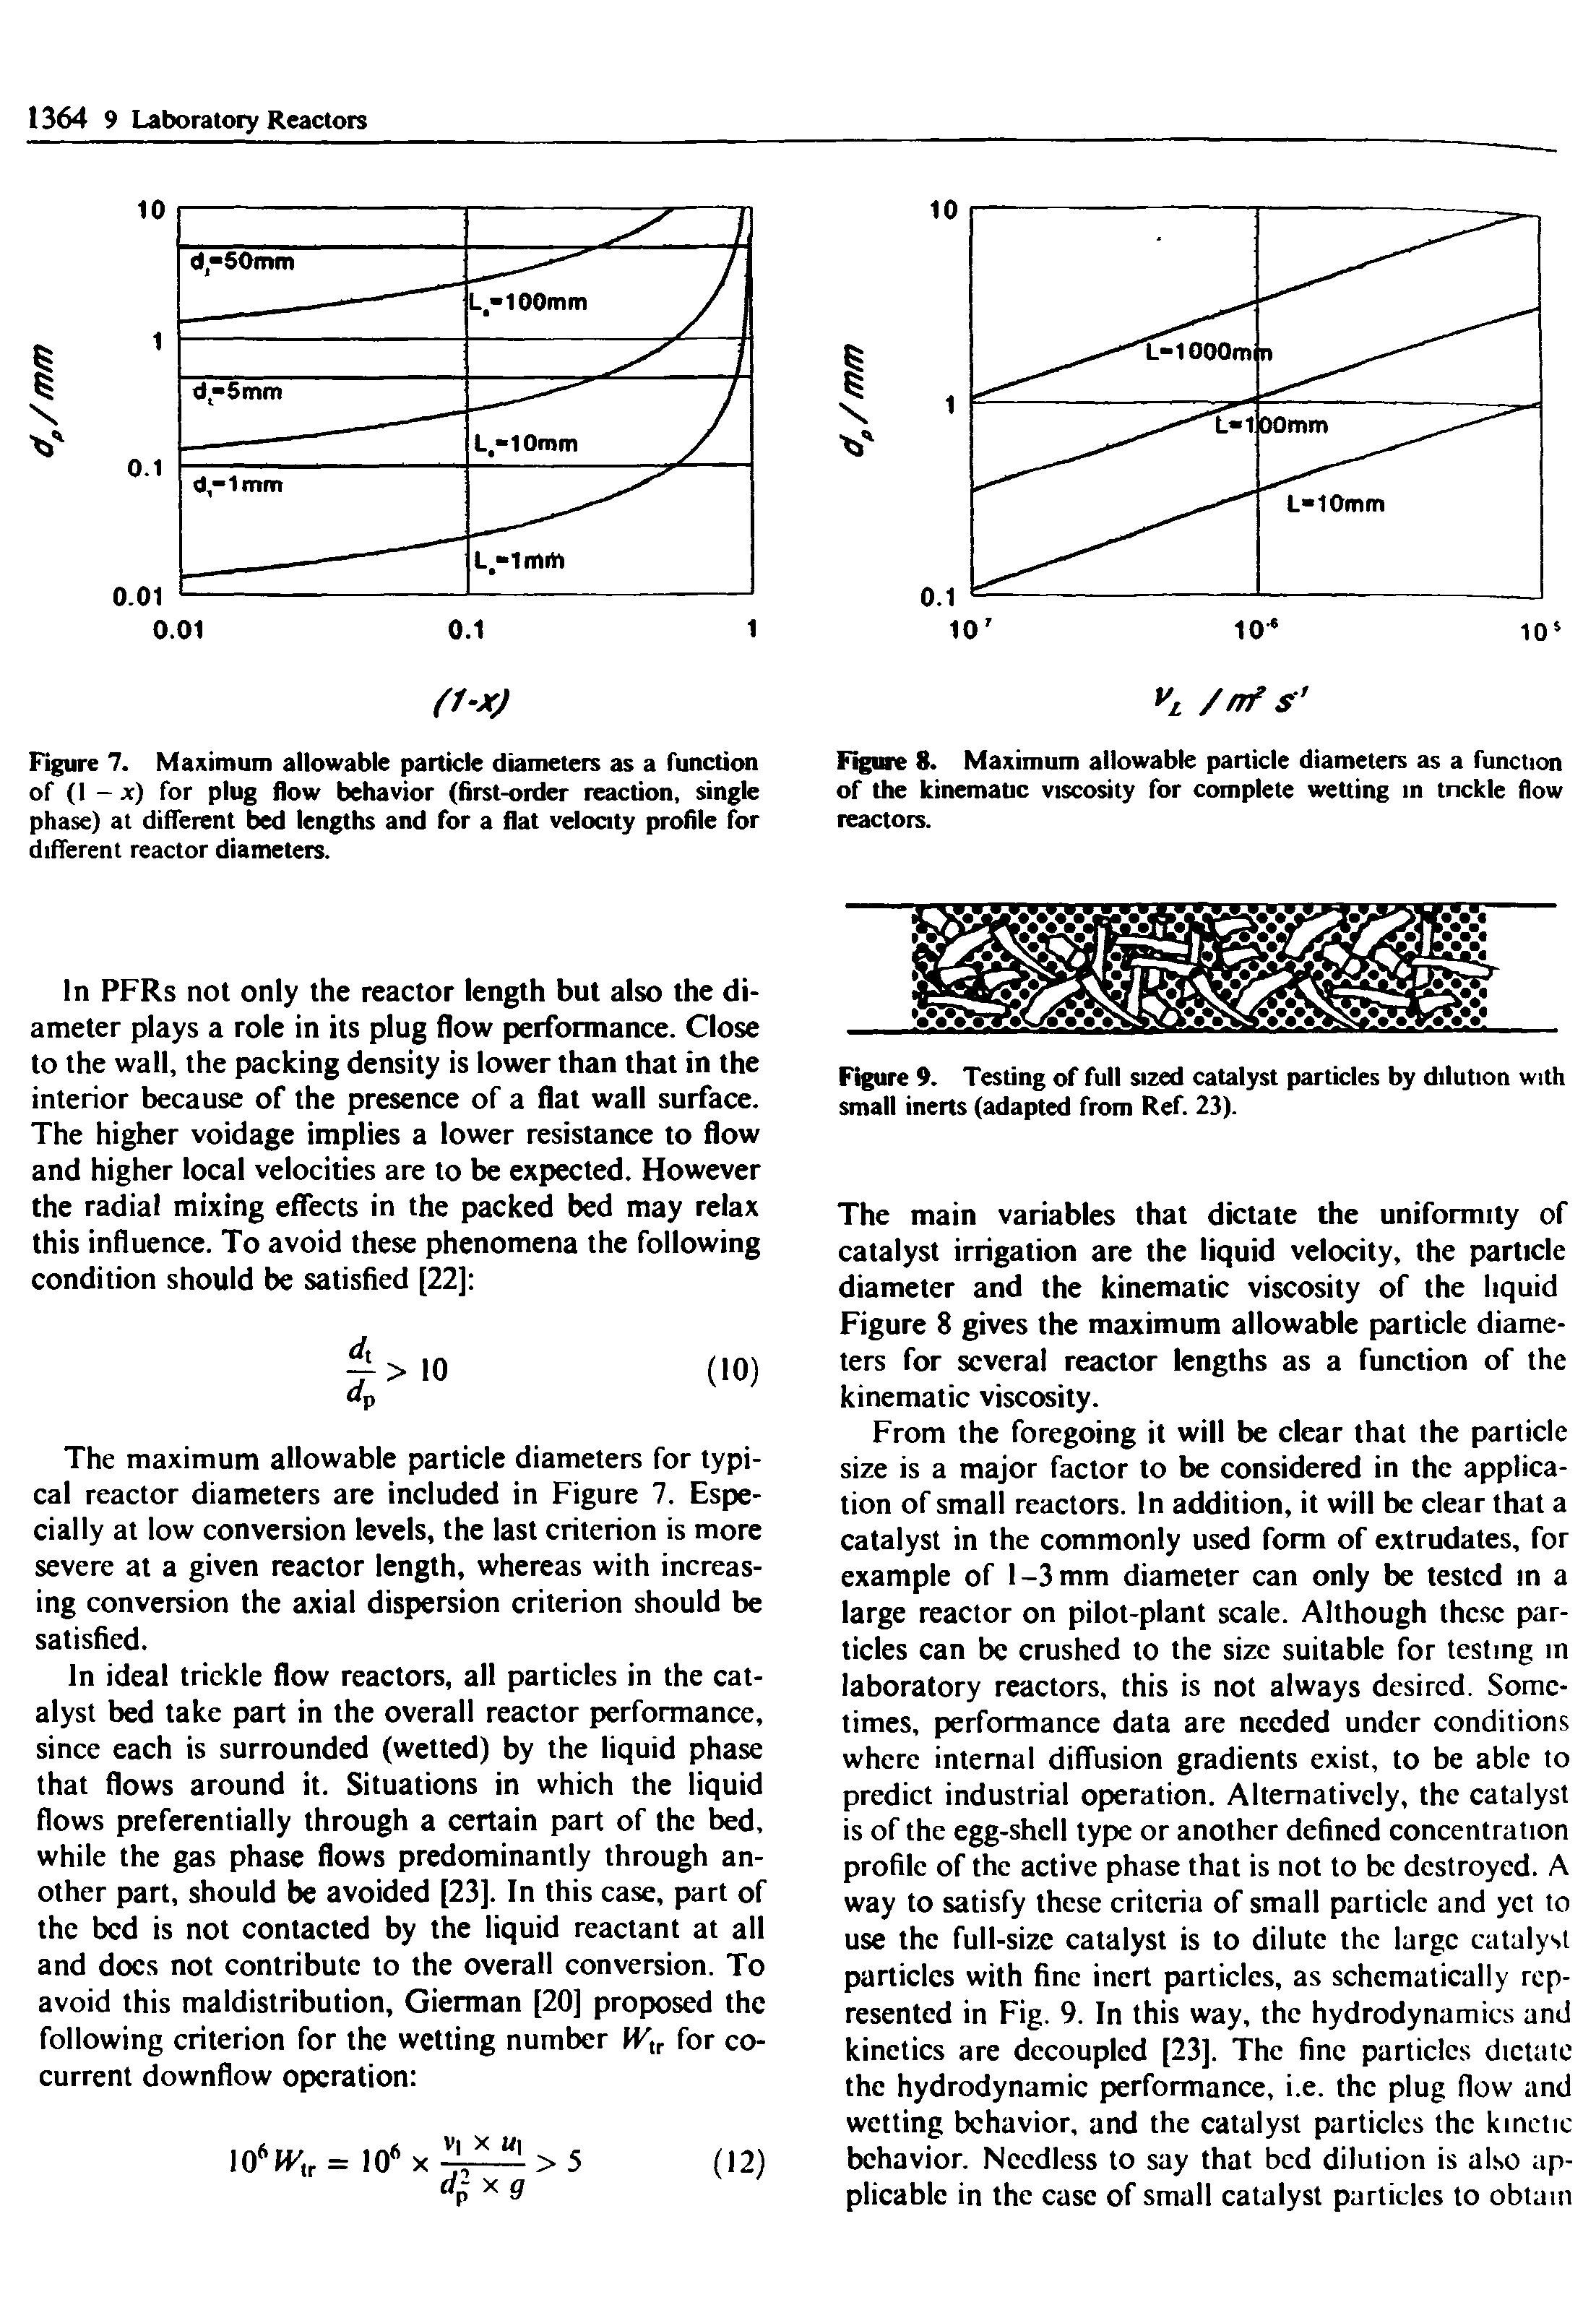 Figure 7. Maximum allowable particle diameters as a function of (1 - x) for plug flow behavior (first-order reaction, single phase) at different bed lengths and for a flat velocity profile for different reactor diameters.